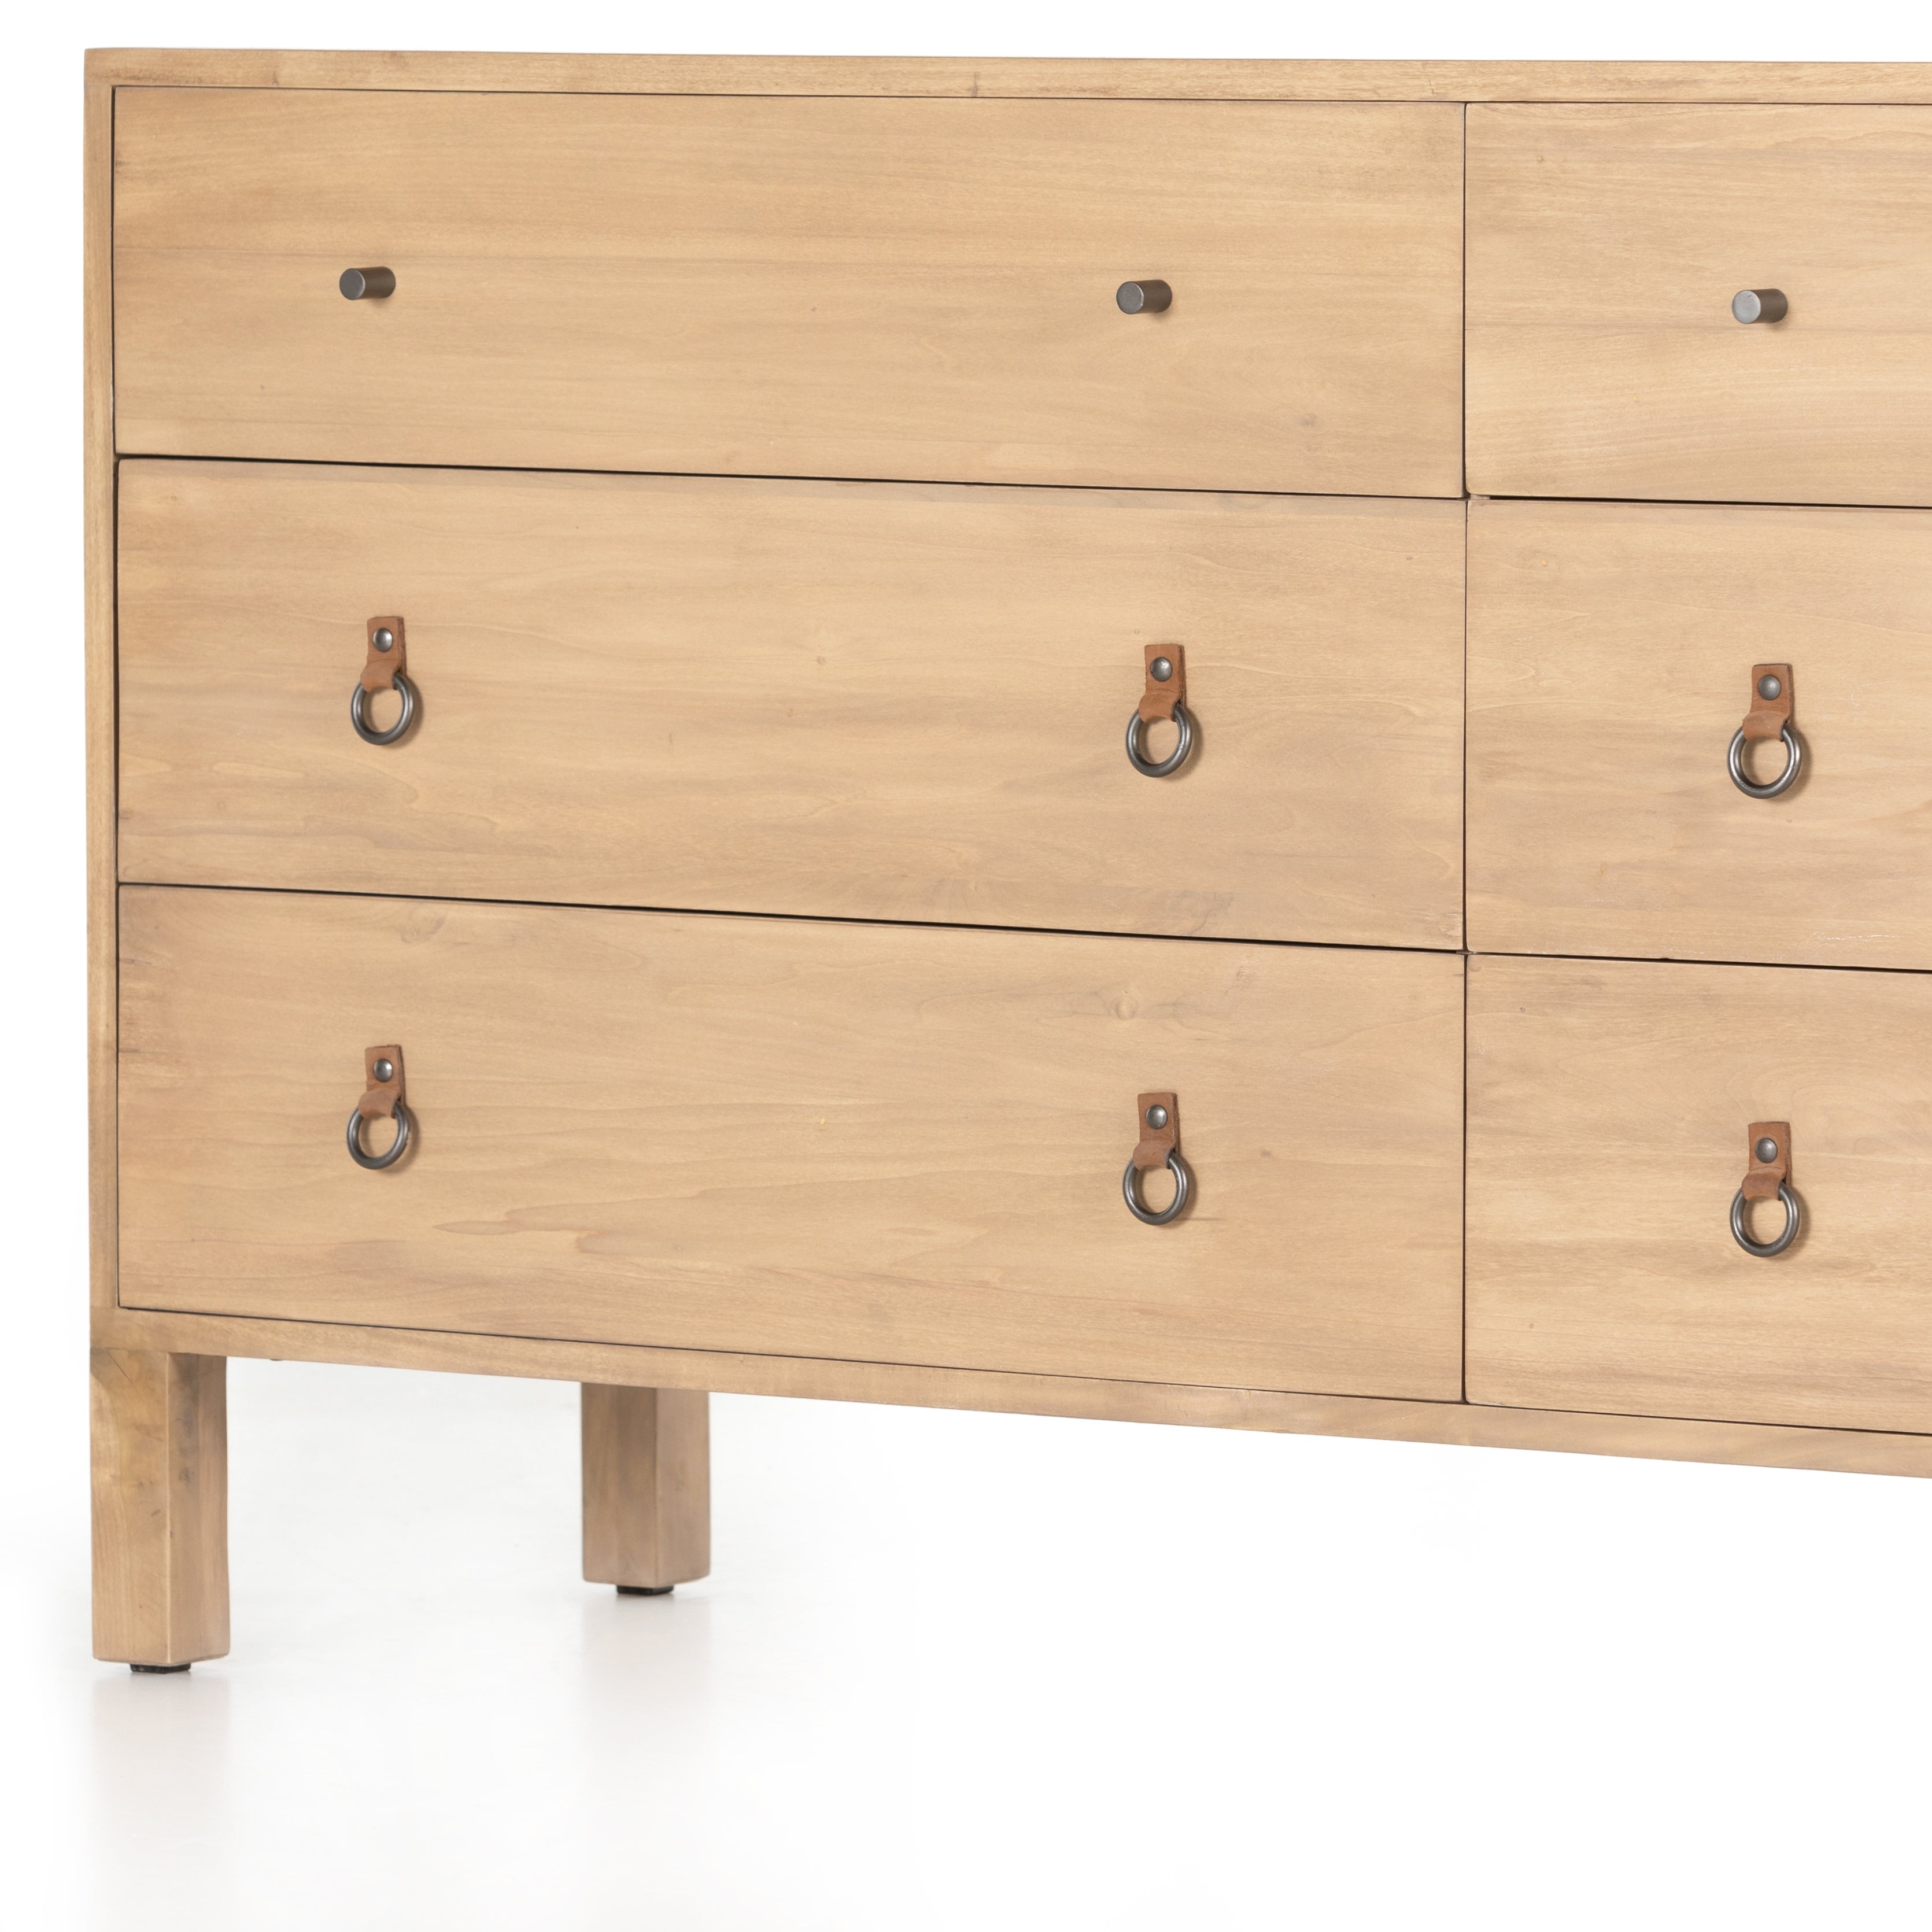 This Isador 6 Drawer Dresser - Dry Wash Poplar is beautifully simple in spirit. Solid dry-washed poplar forms a spacious six-drawer dresser, with dovetail joinery plus iron and leather hardware for a fresh, bright look in any bedroom.   Overall Dimensions: 65.00